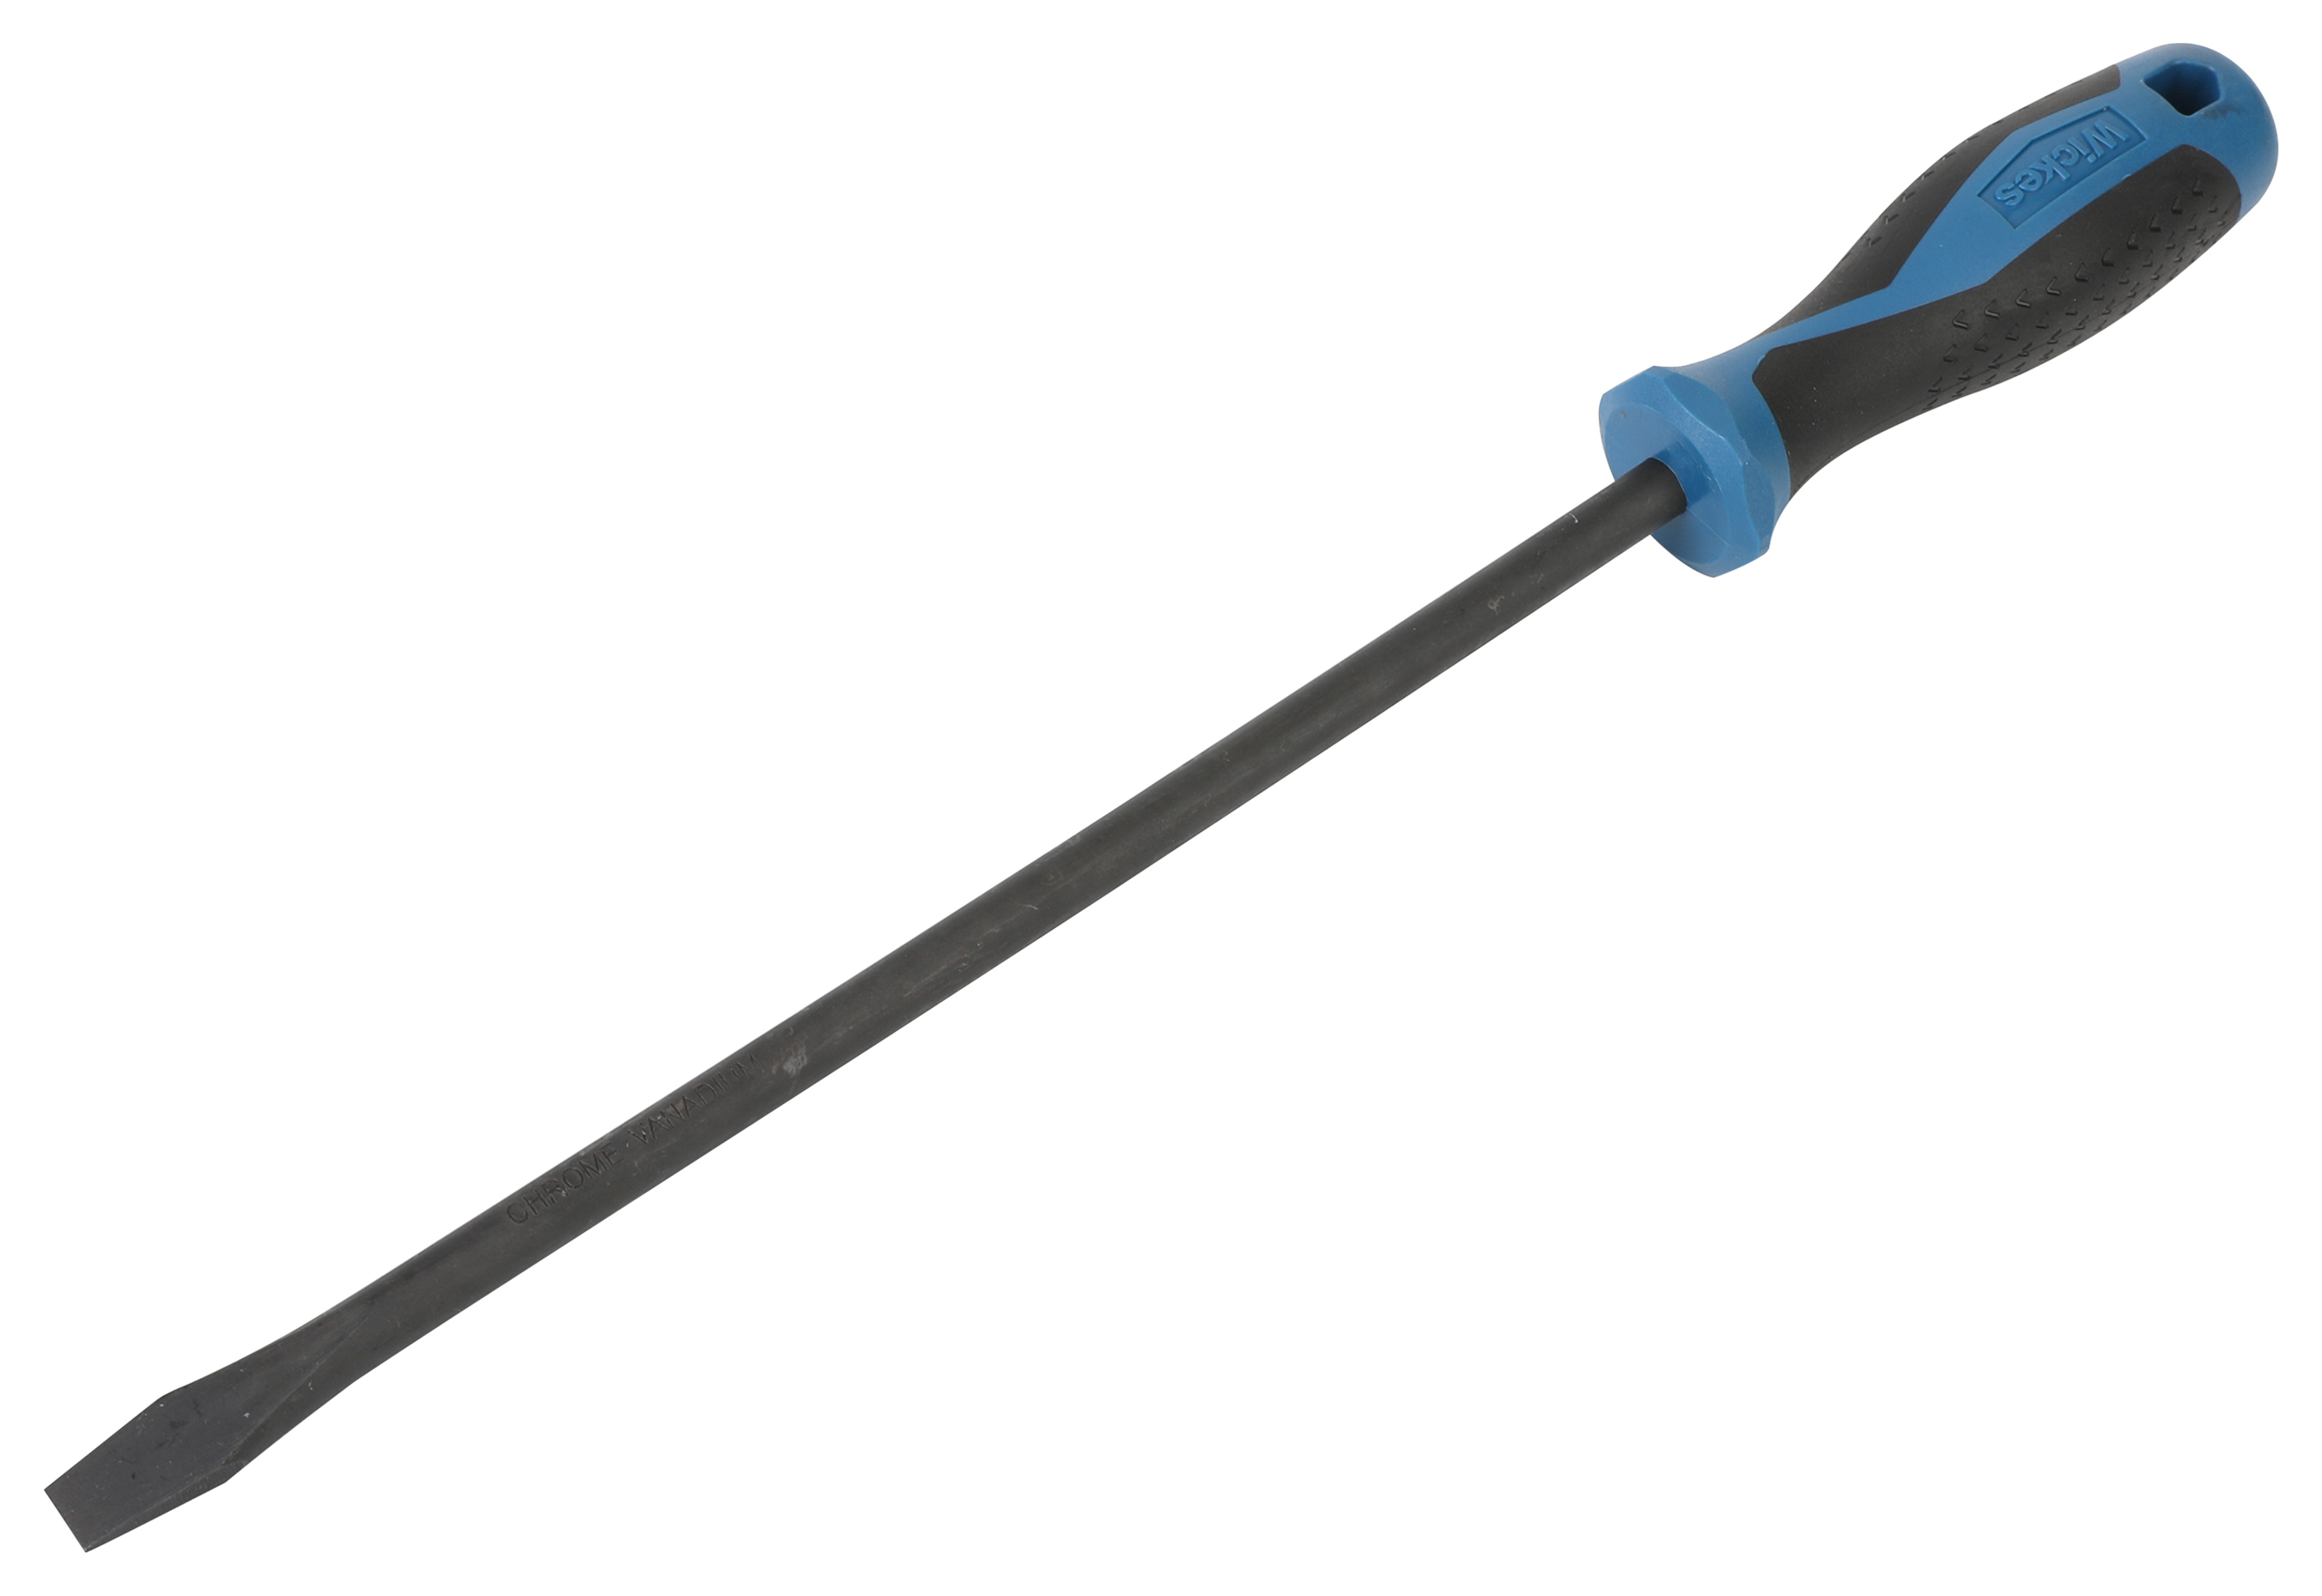 Wickes 10mm Soft Grip Slotted Screwdriver - 250mm